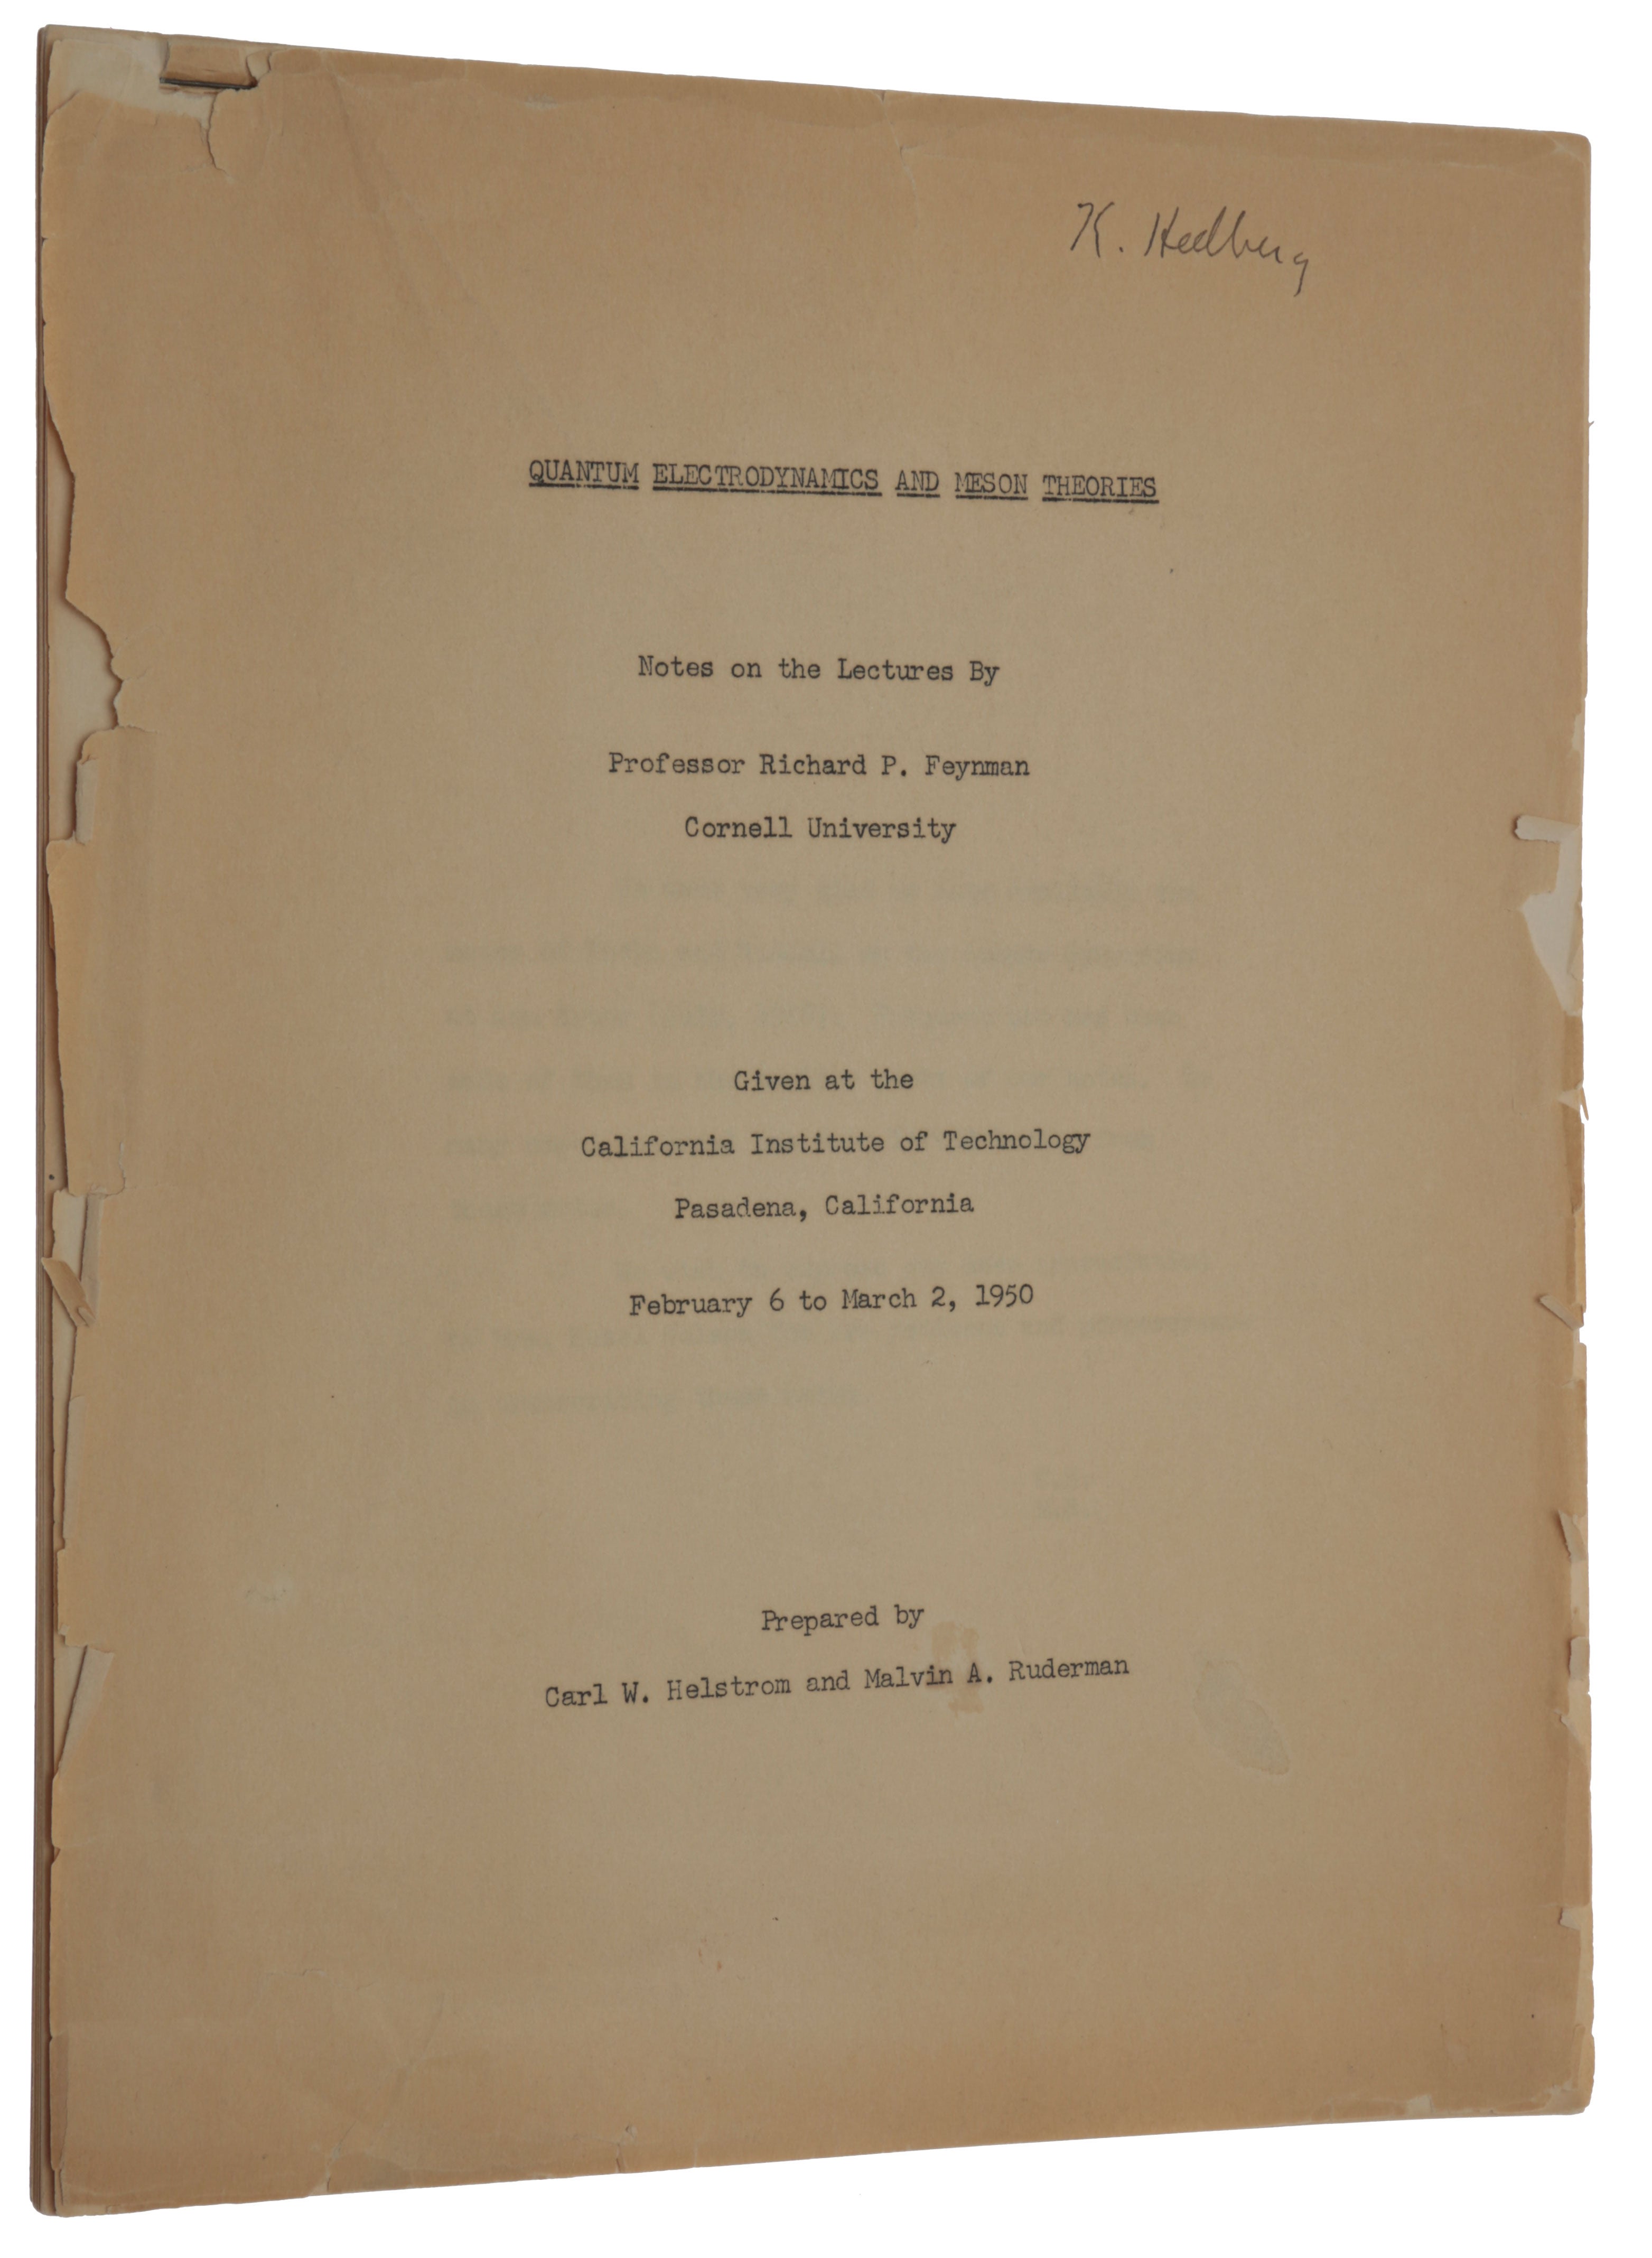 Item #5205 Quantum Electrodynamics and Meson Theories. Notes on the Lectures by Professor Richard P. Feynman, Cornell University. Given at the California Institute of Technology, Pasadena, California, February 6 to March 2, 1950. Prepared by Carl W. Helstrom and Malvin A. Ruderman. Richard P. FEYNMAN.